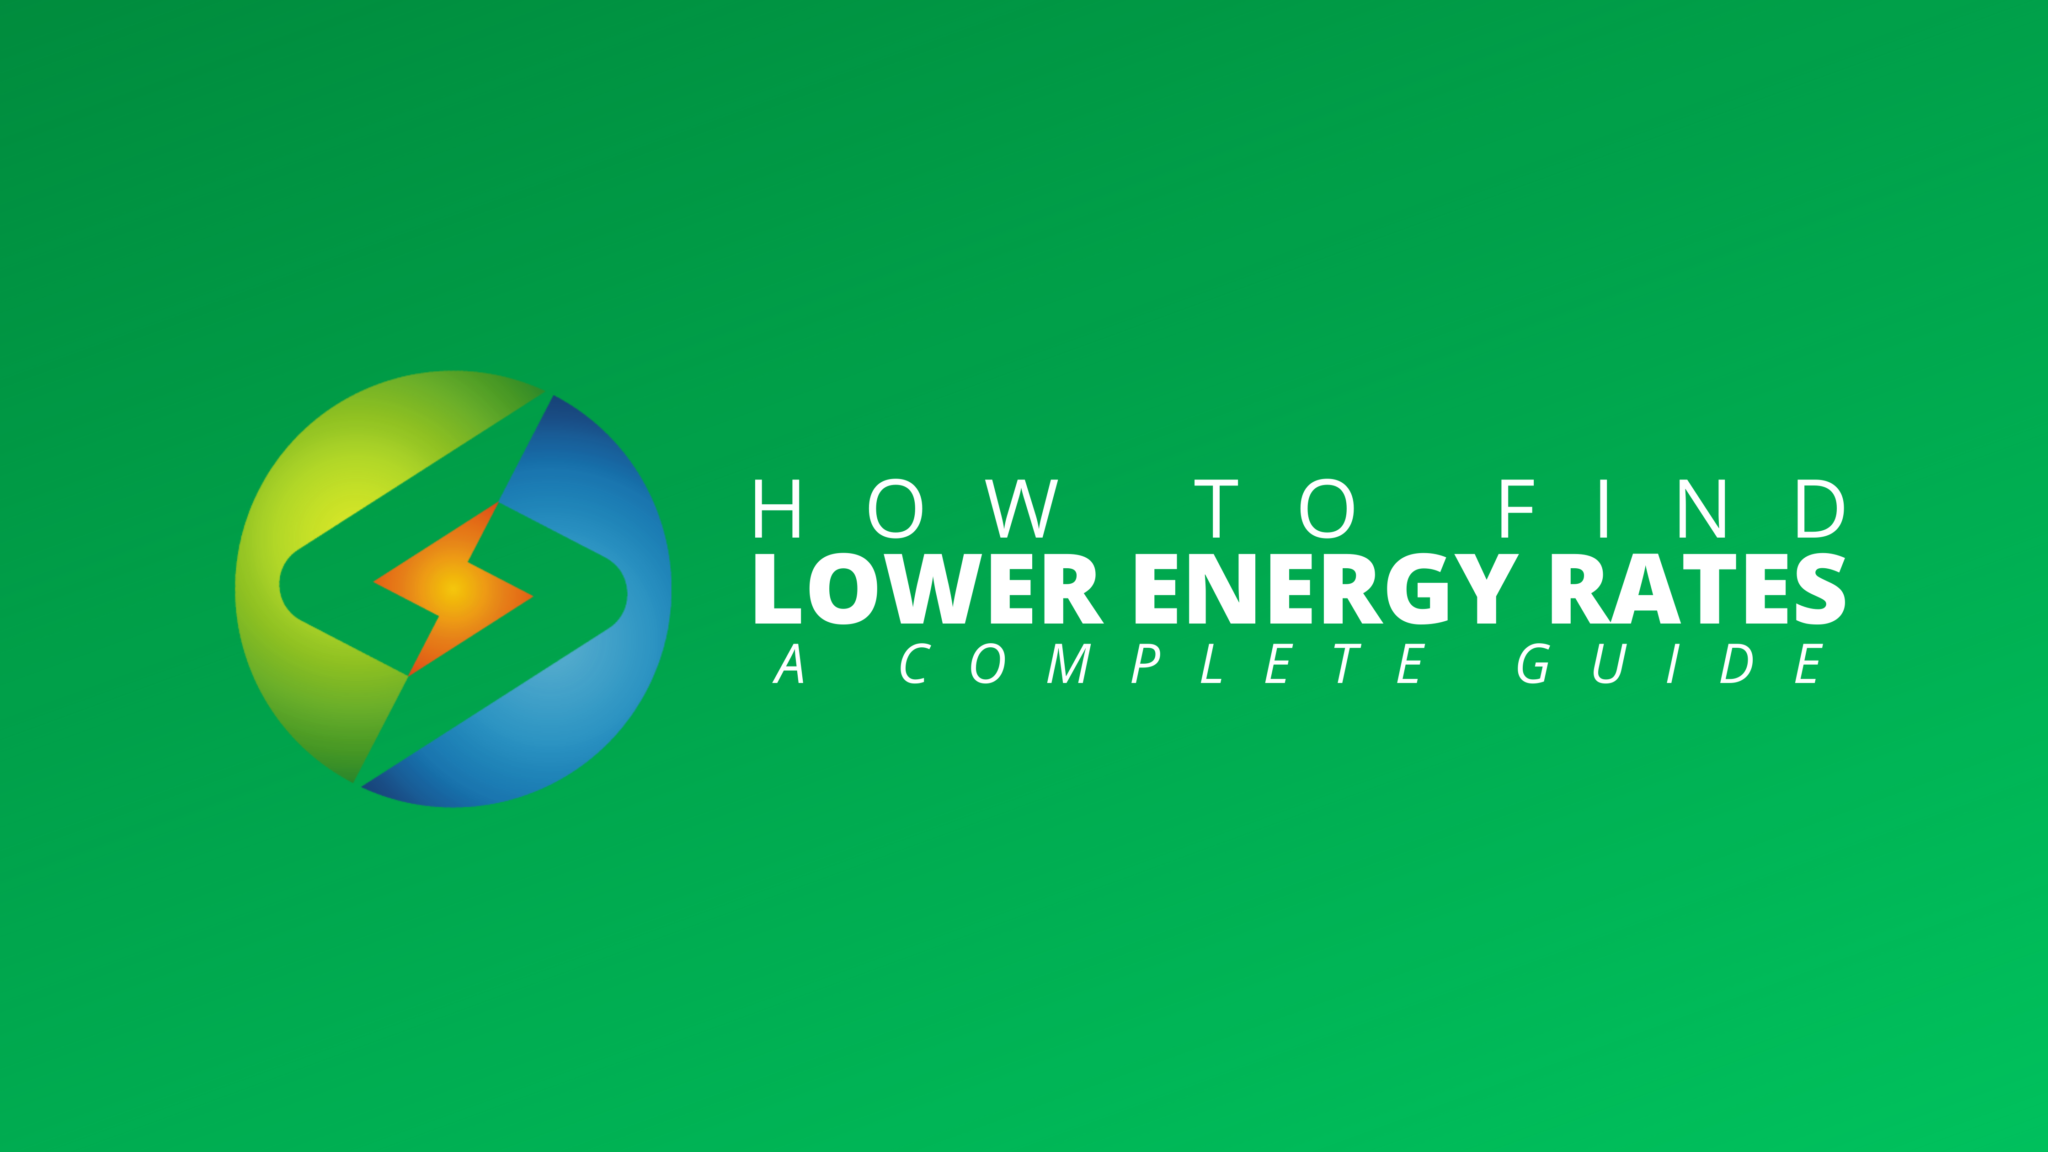 A complete guide on how to find lower energy rates